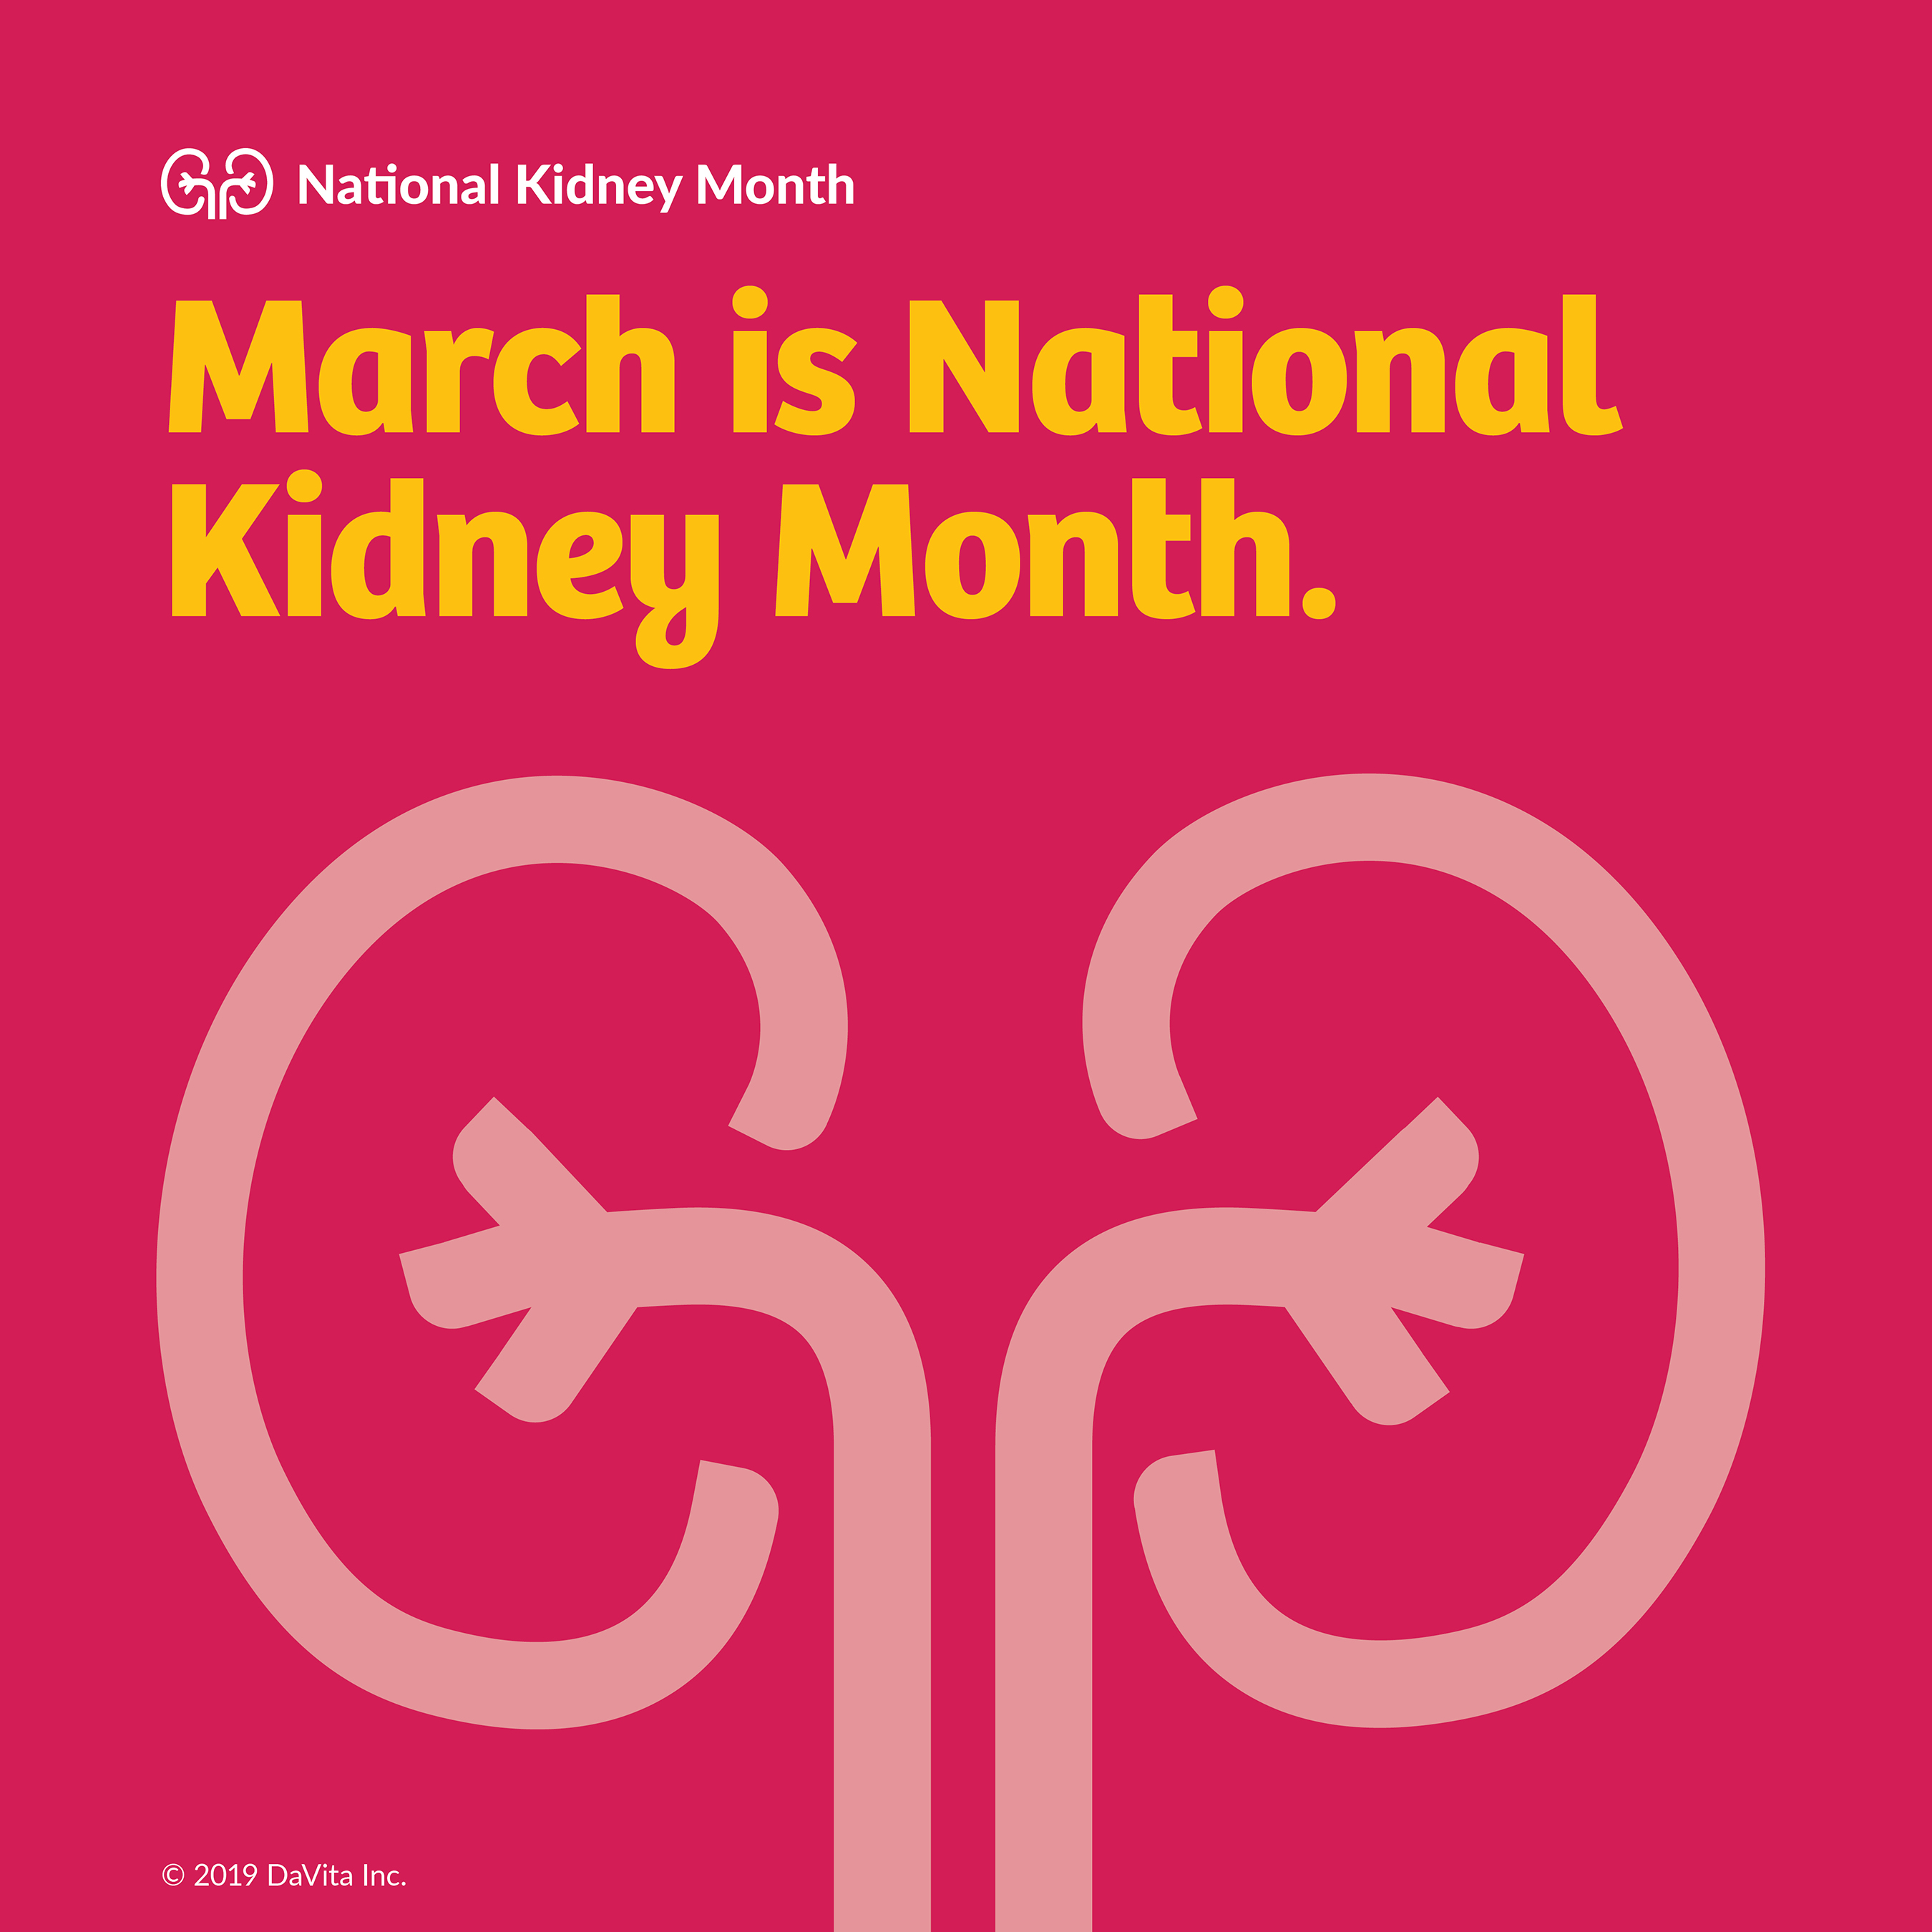 March is National Kidney Month